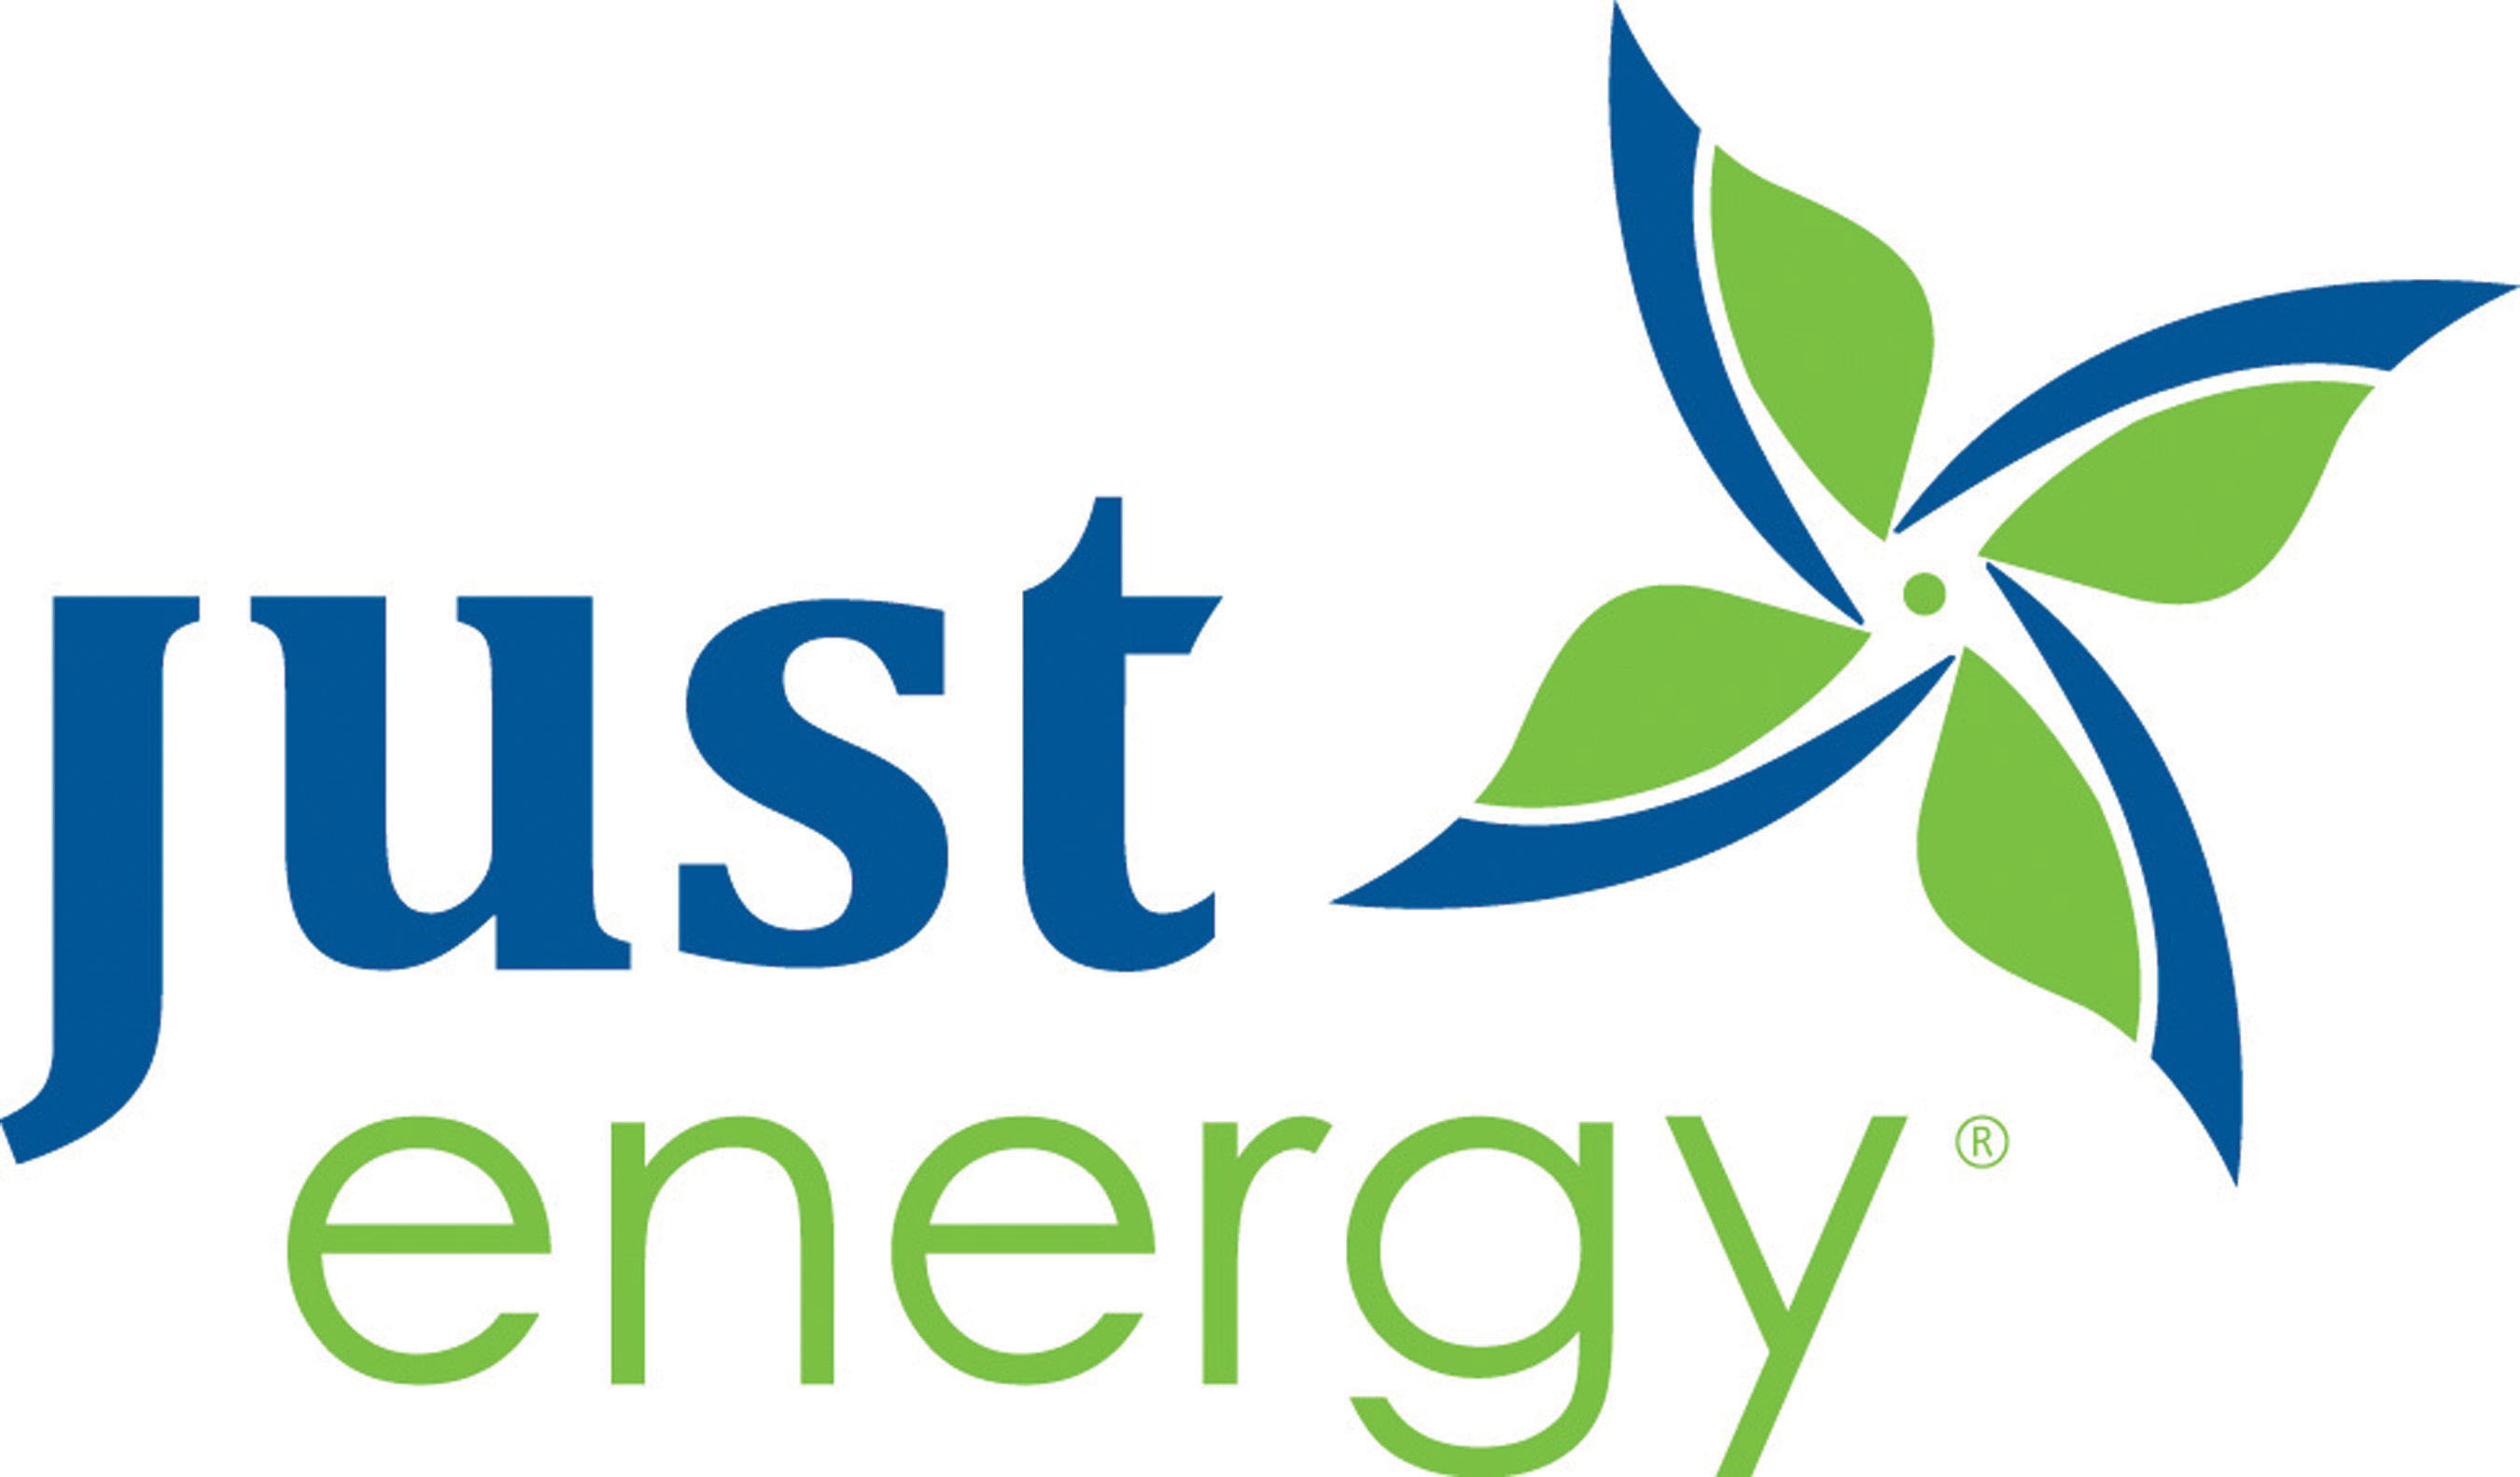 Just Energy is a leading North American natural gas and electricity retailer, and a market leader in green energy programs and home comfort services.